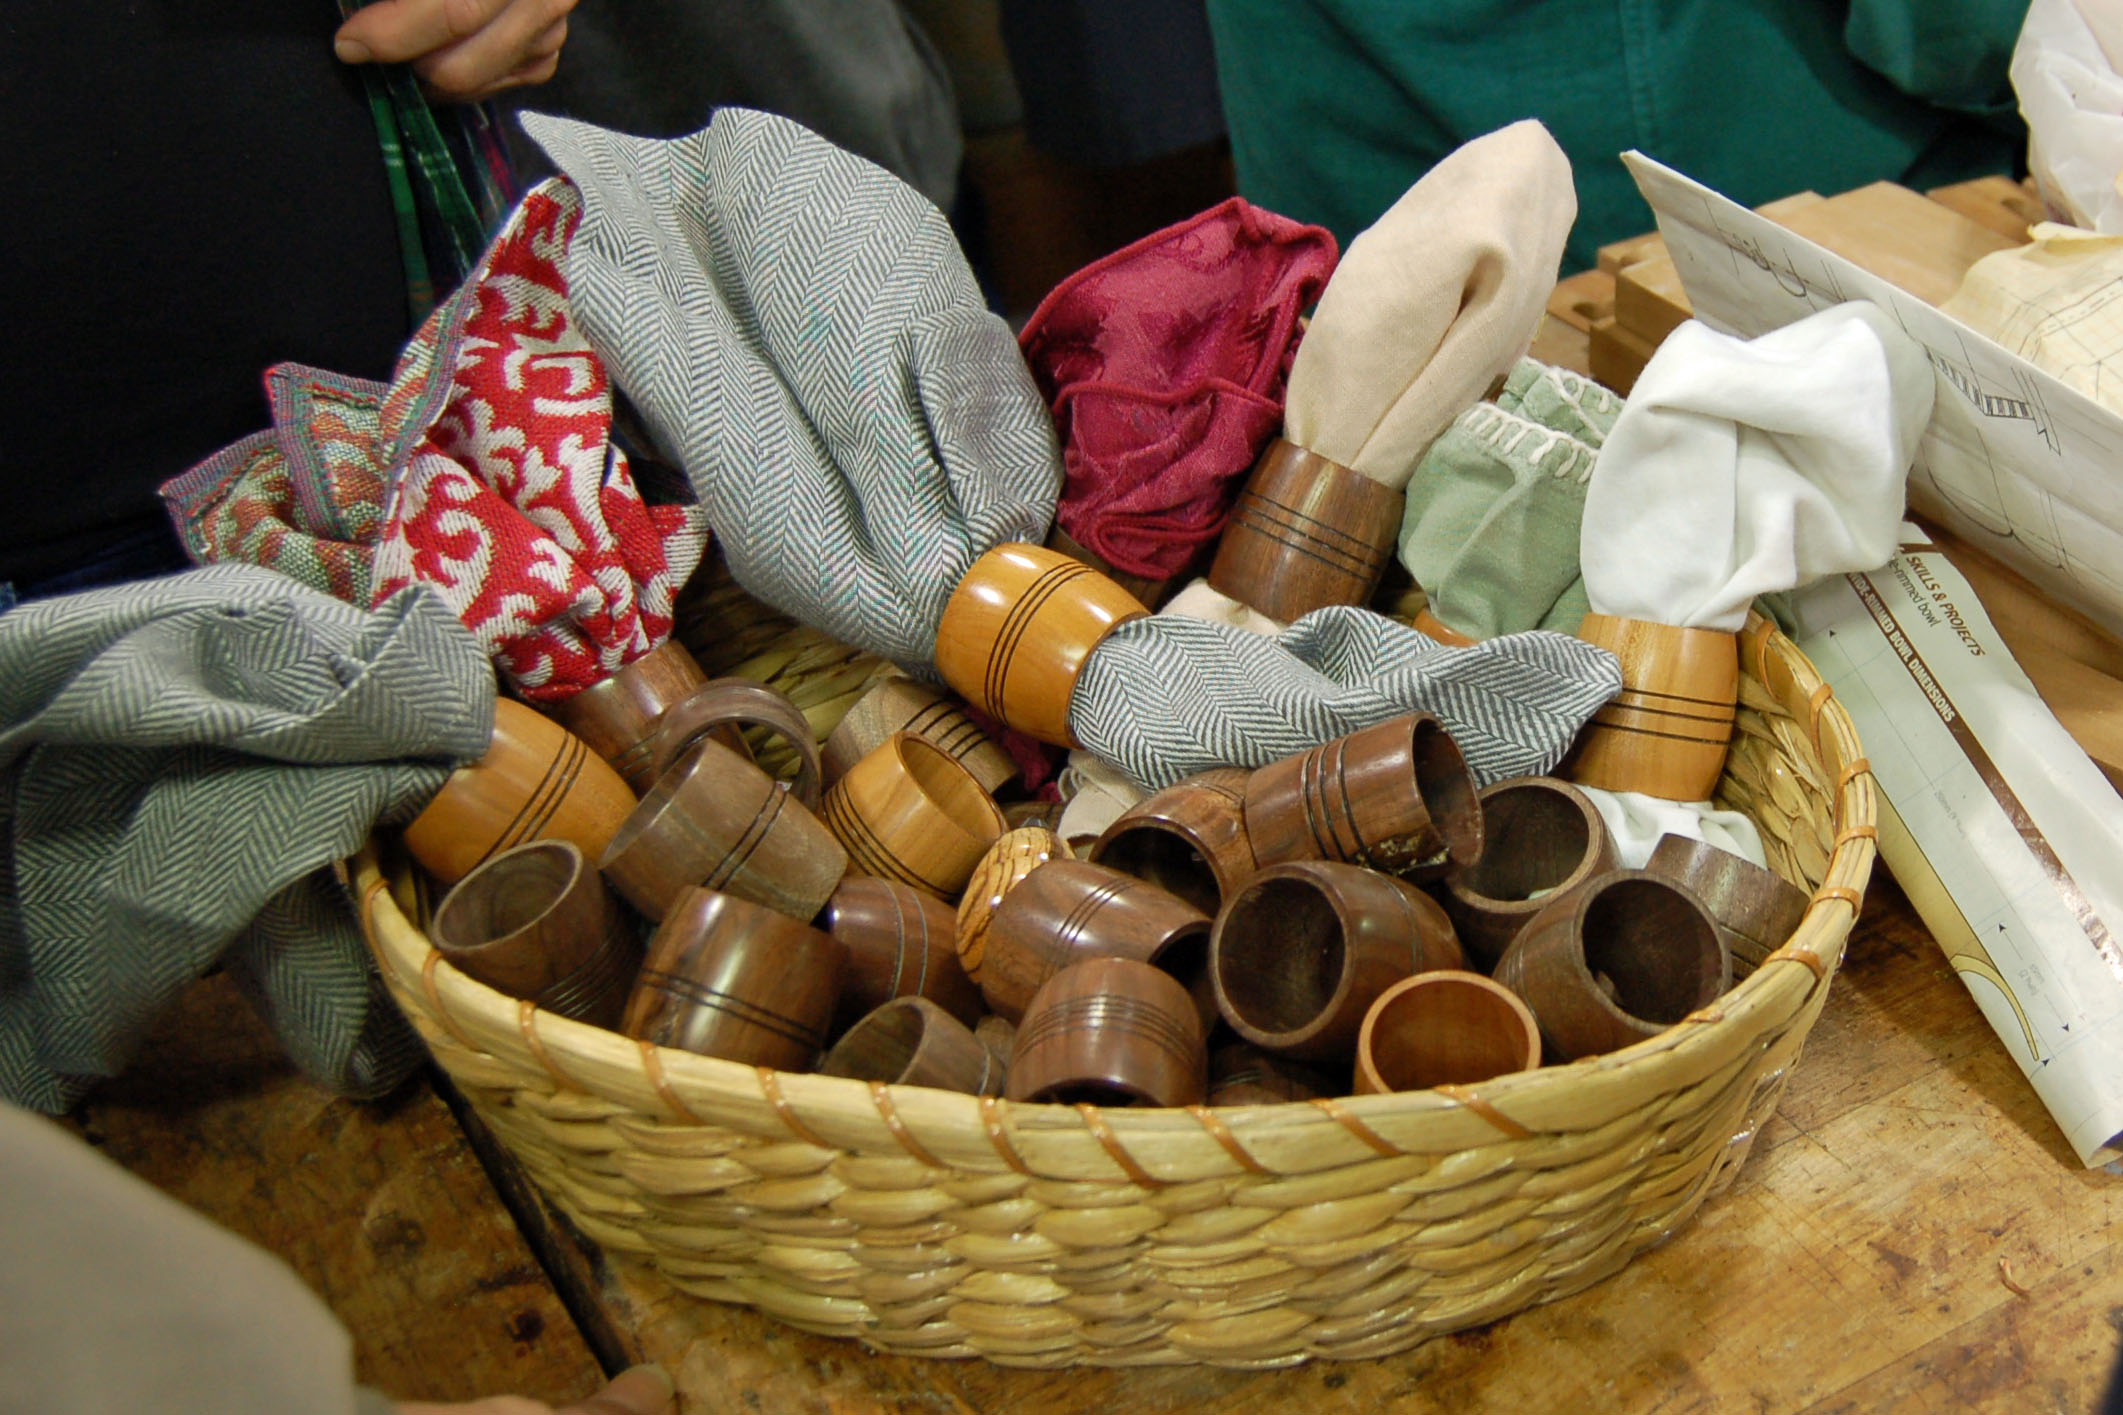  Here are some napkin rings some of Ed's young students turned. &nbsp; 